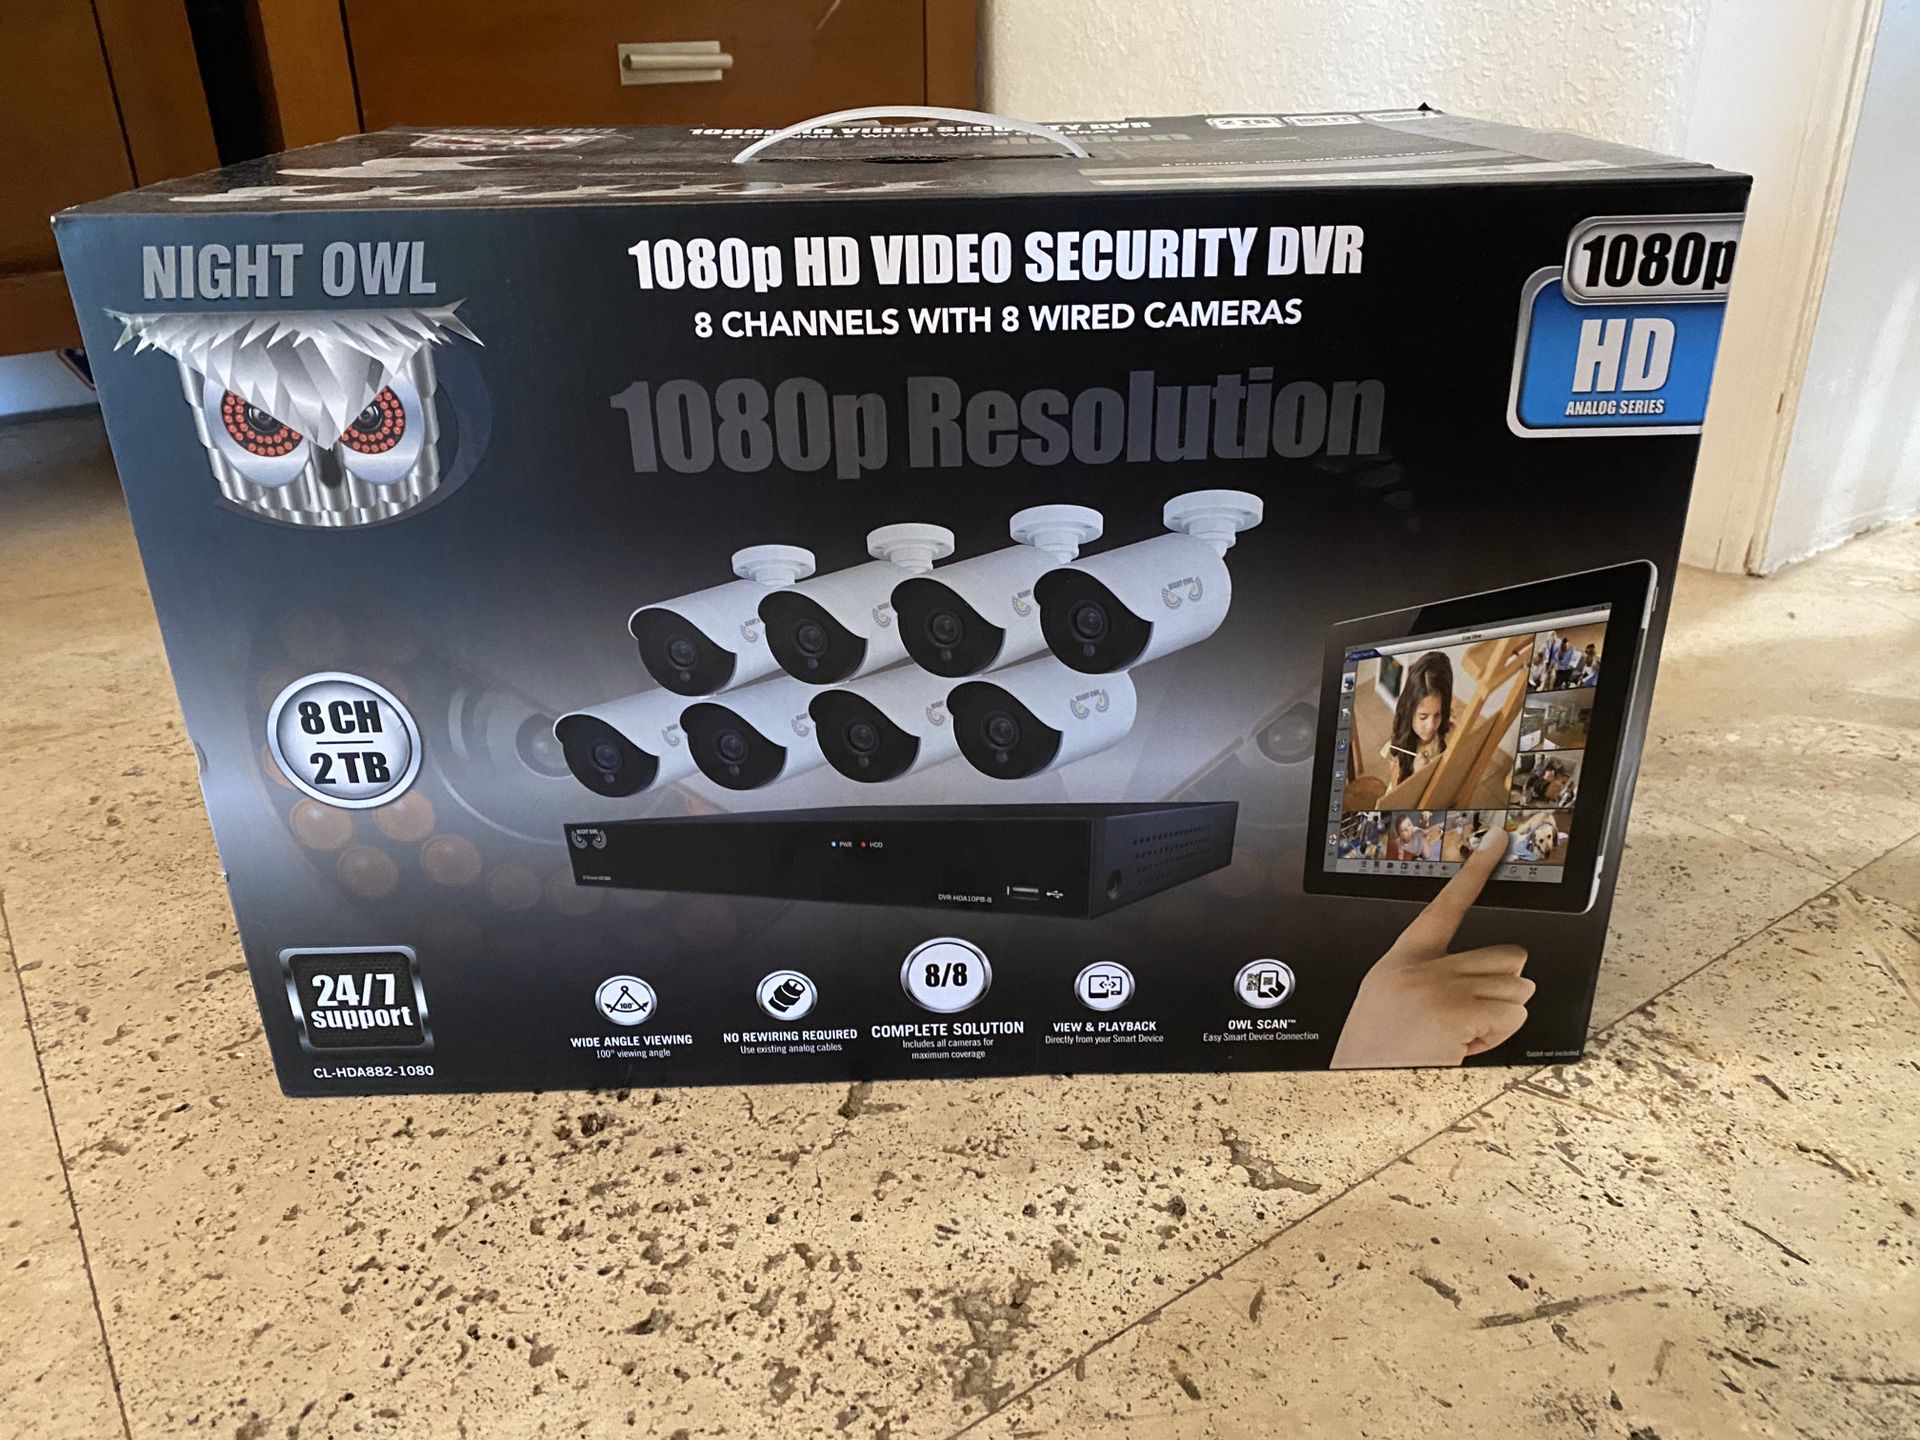 1080p HD Night Owl video security camera and DVR